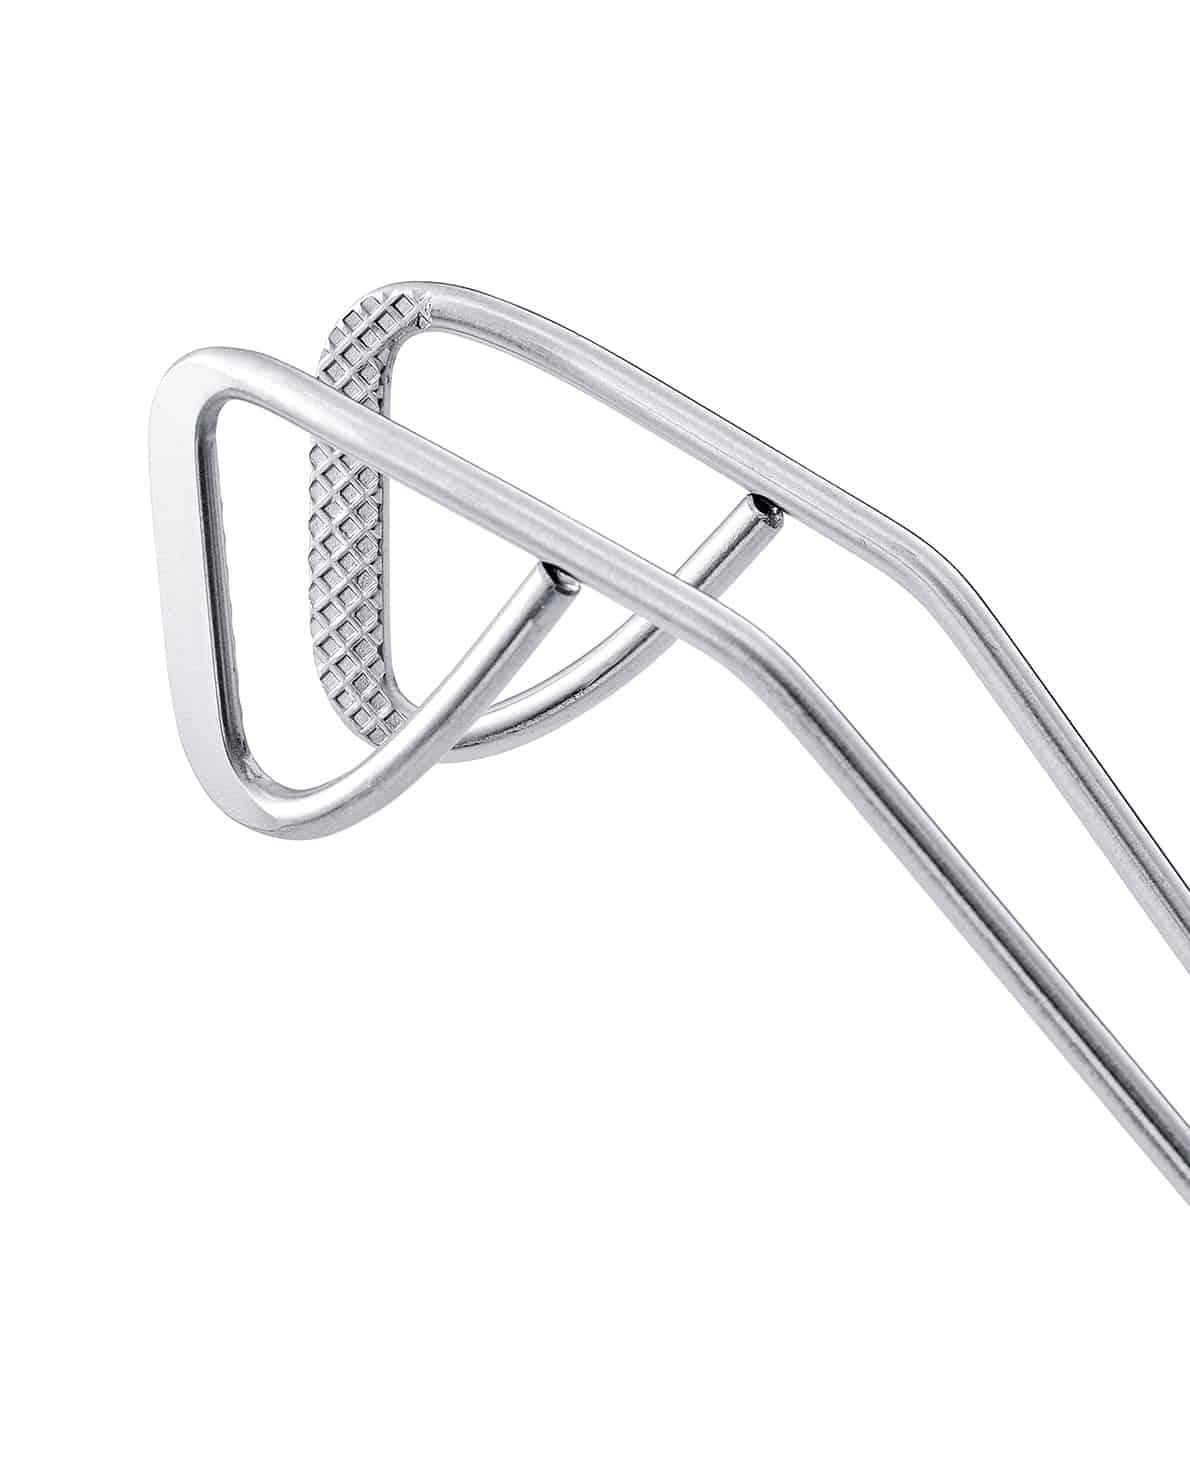 Stainless Steel Triangle Cooking Tongs (3 Sizes)